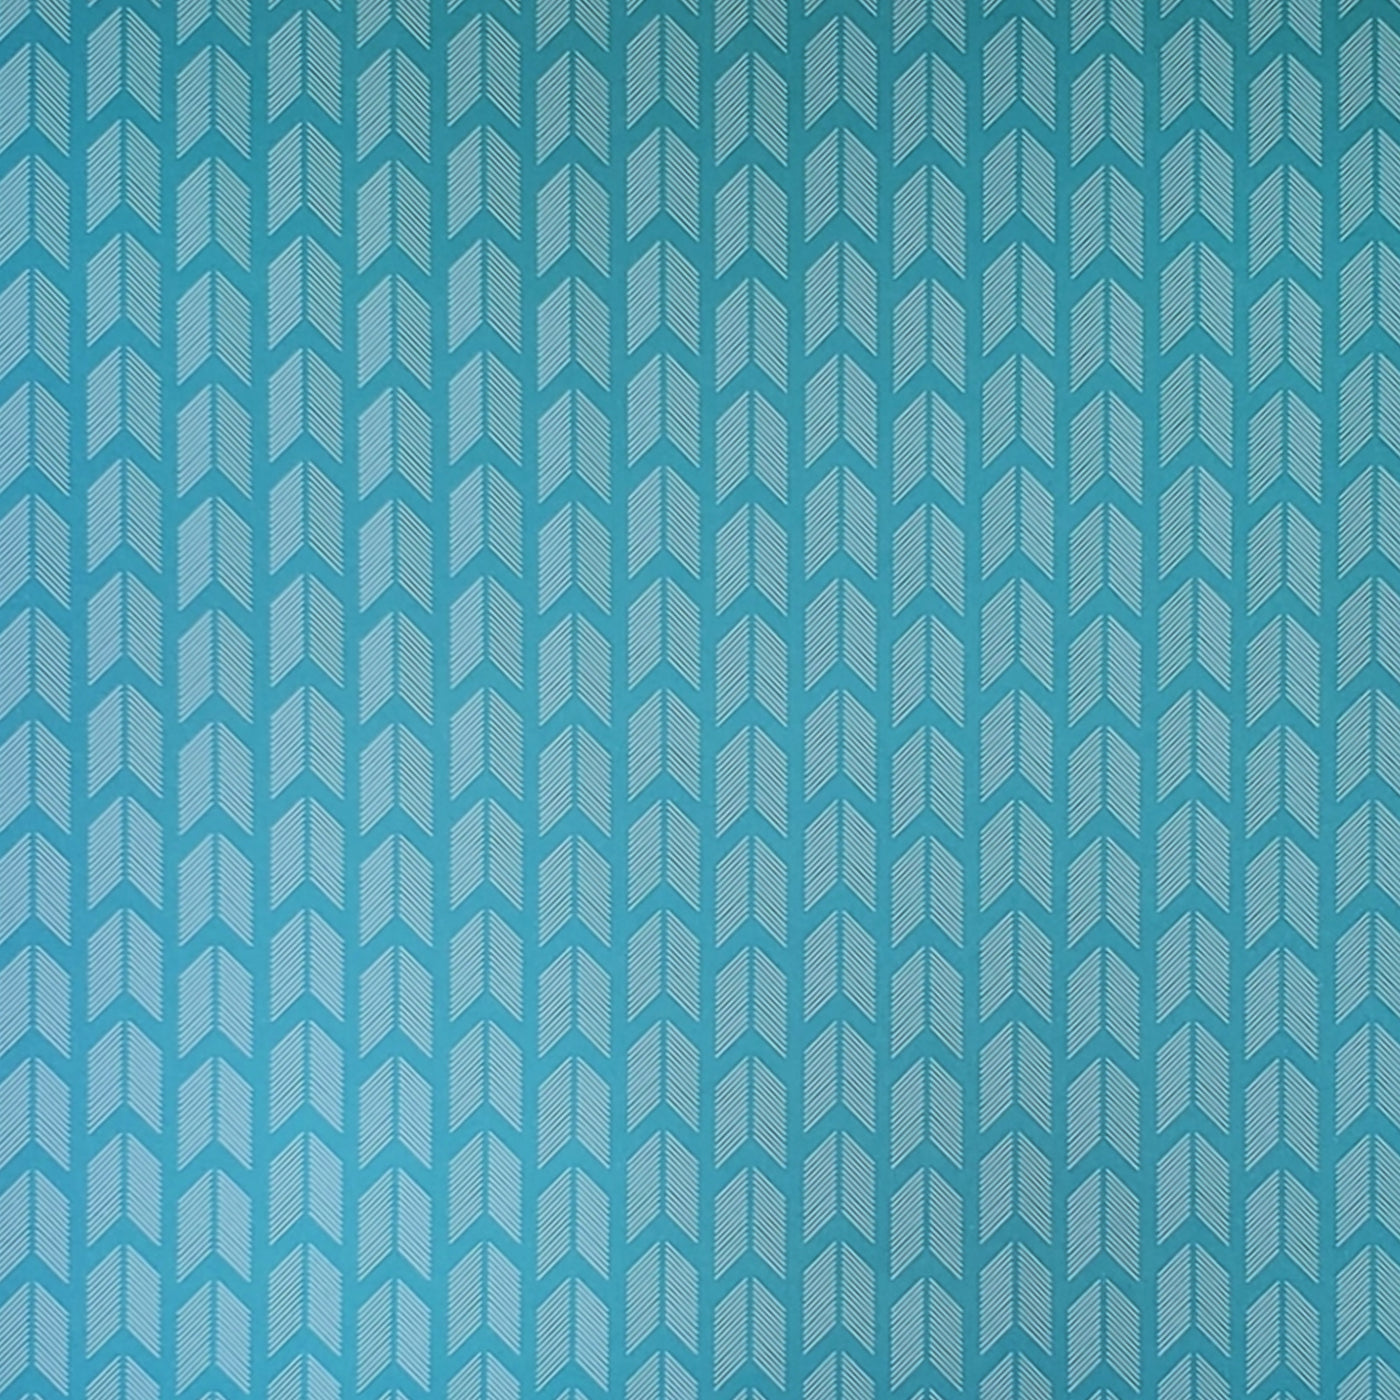 8.5x11 patterned paper with thin white lined arrows on a teal background, white reverse, archival quality from Core'dinations.